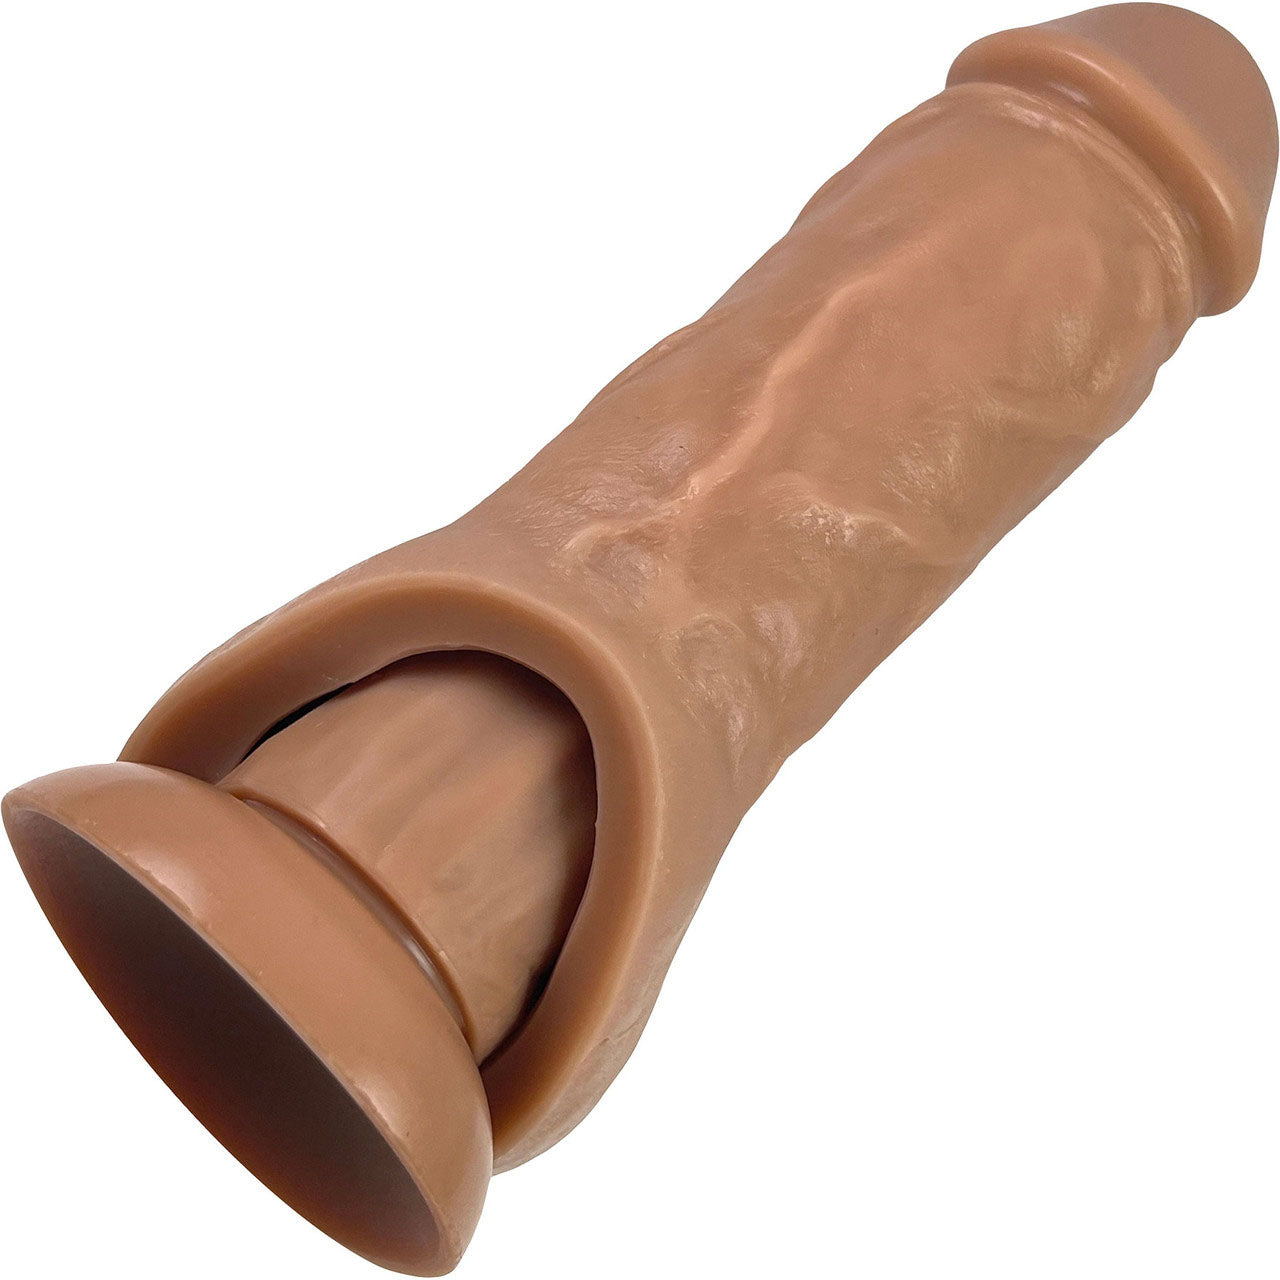 The front of the caramel Holster Vixskin Extender Dildo with a caramel dildo inserted.